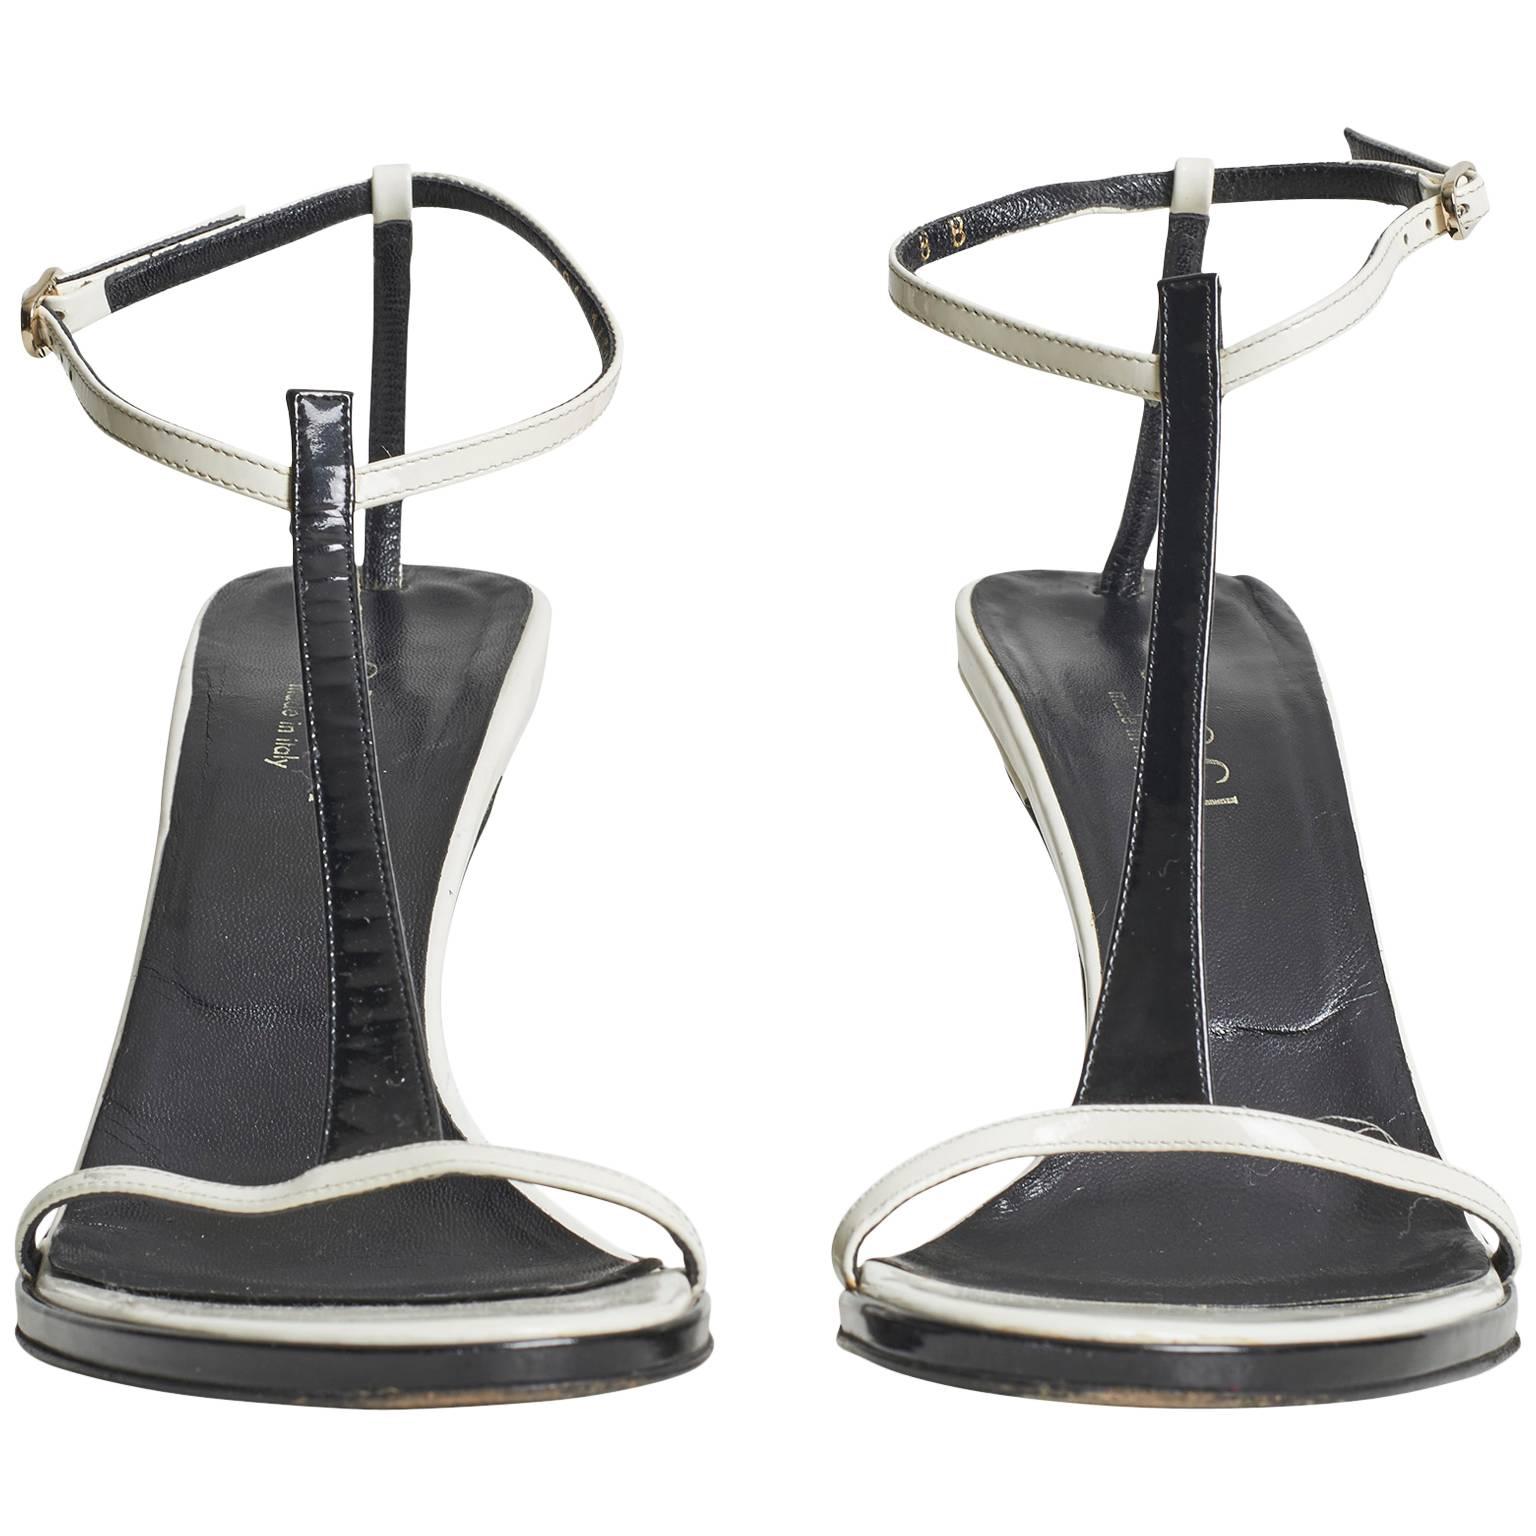 Chic leather white and black Gucci 'barely there' strappy sandals featuring a thin ankle strap fastening and a black flattering strap down the middle. Elegant yet sassy, these shoes are ideal for almost every occasion from a timeless day outfit to a